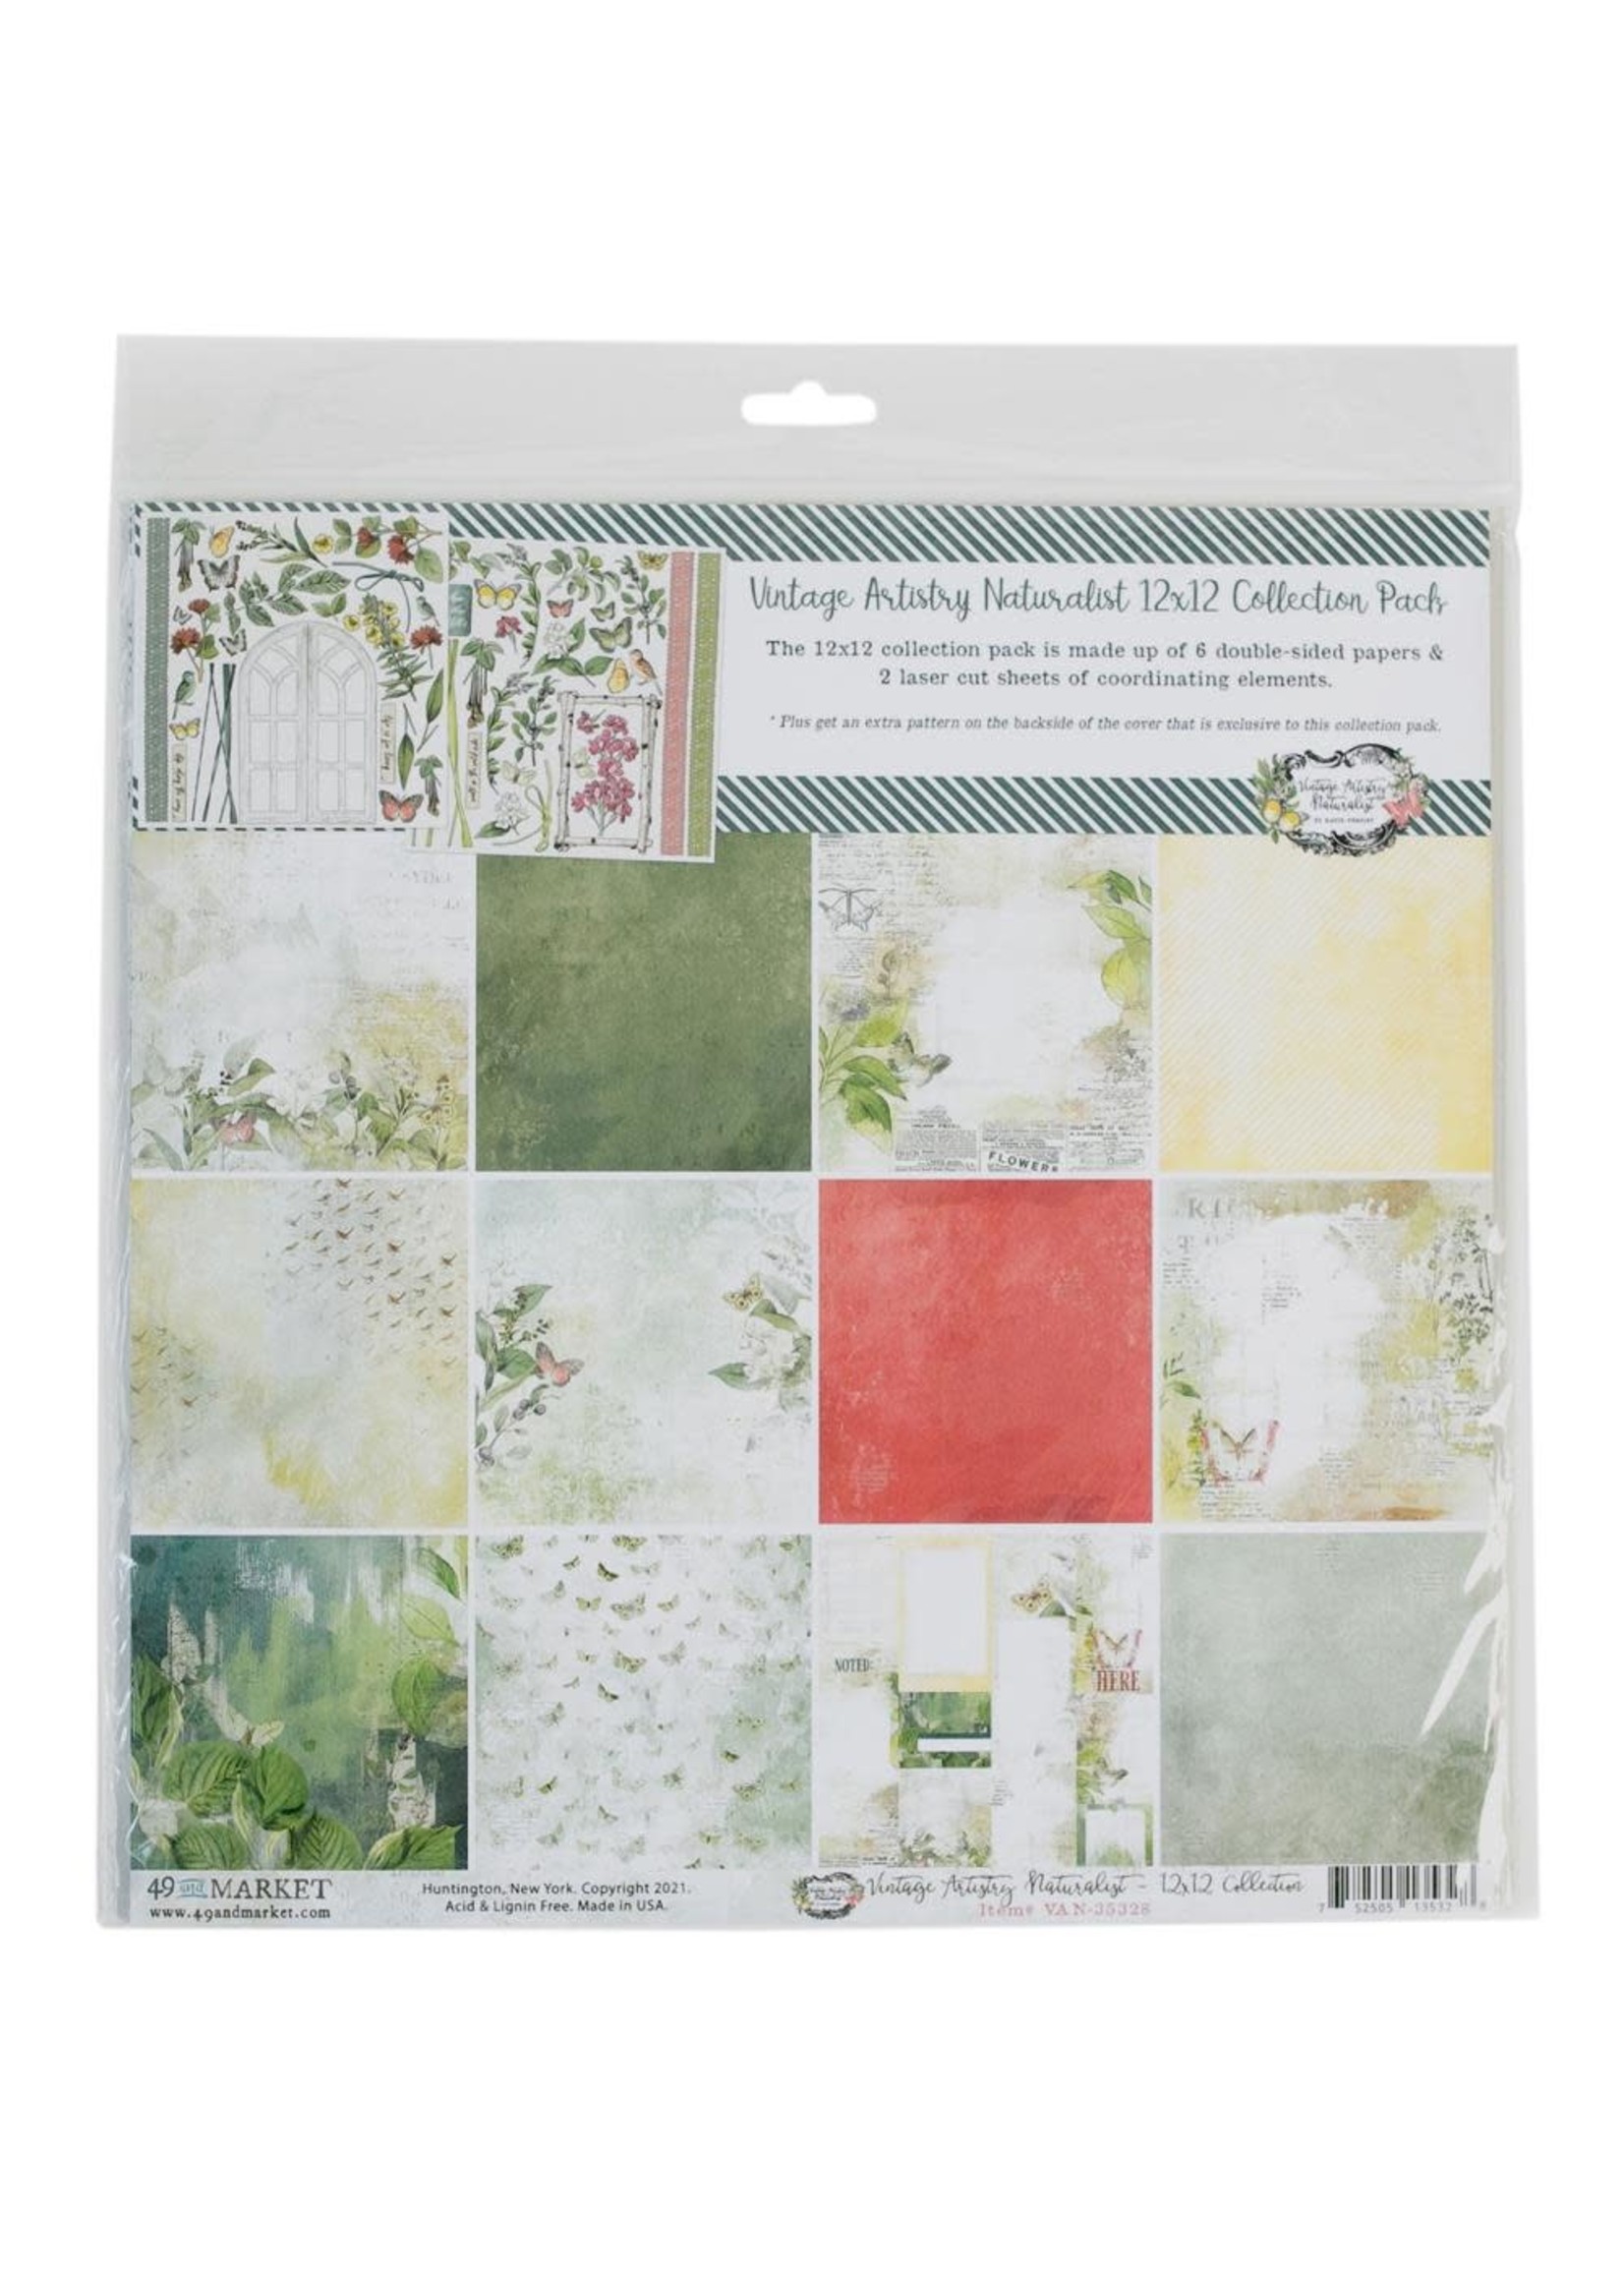 49 AND MARKET Vintage Artistry Naturalist 12x12 Collection Pack